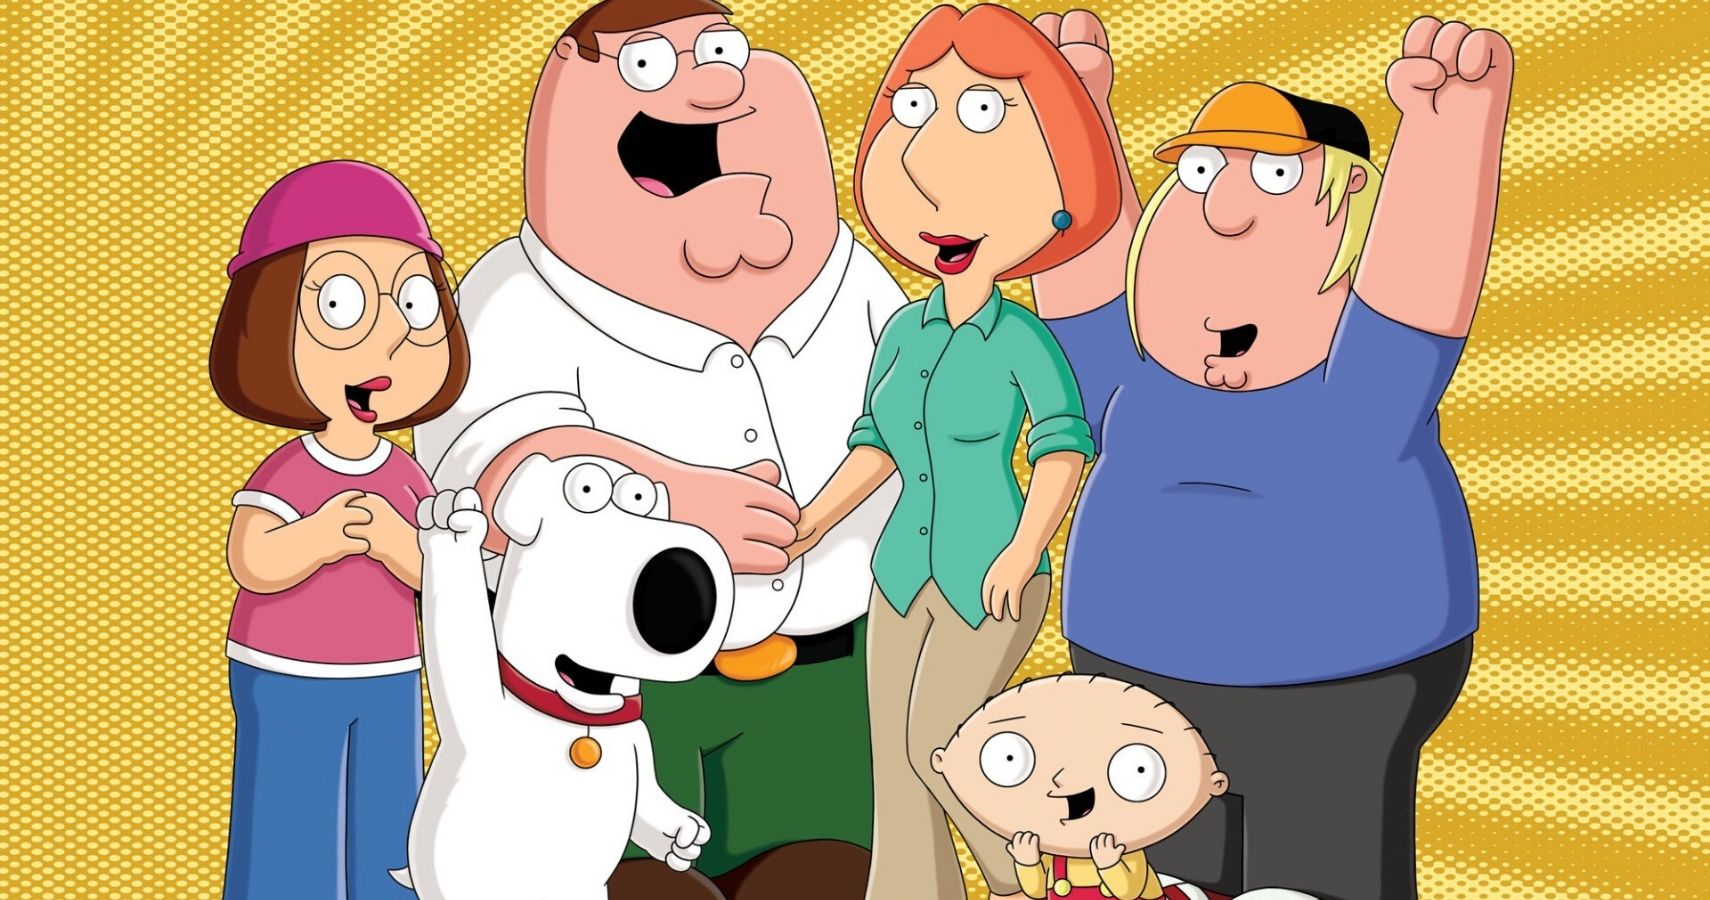 Live Action Casting of Family Guy Characters